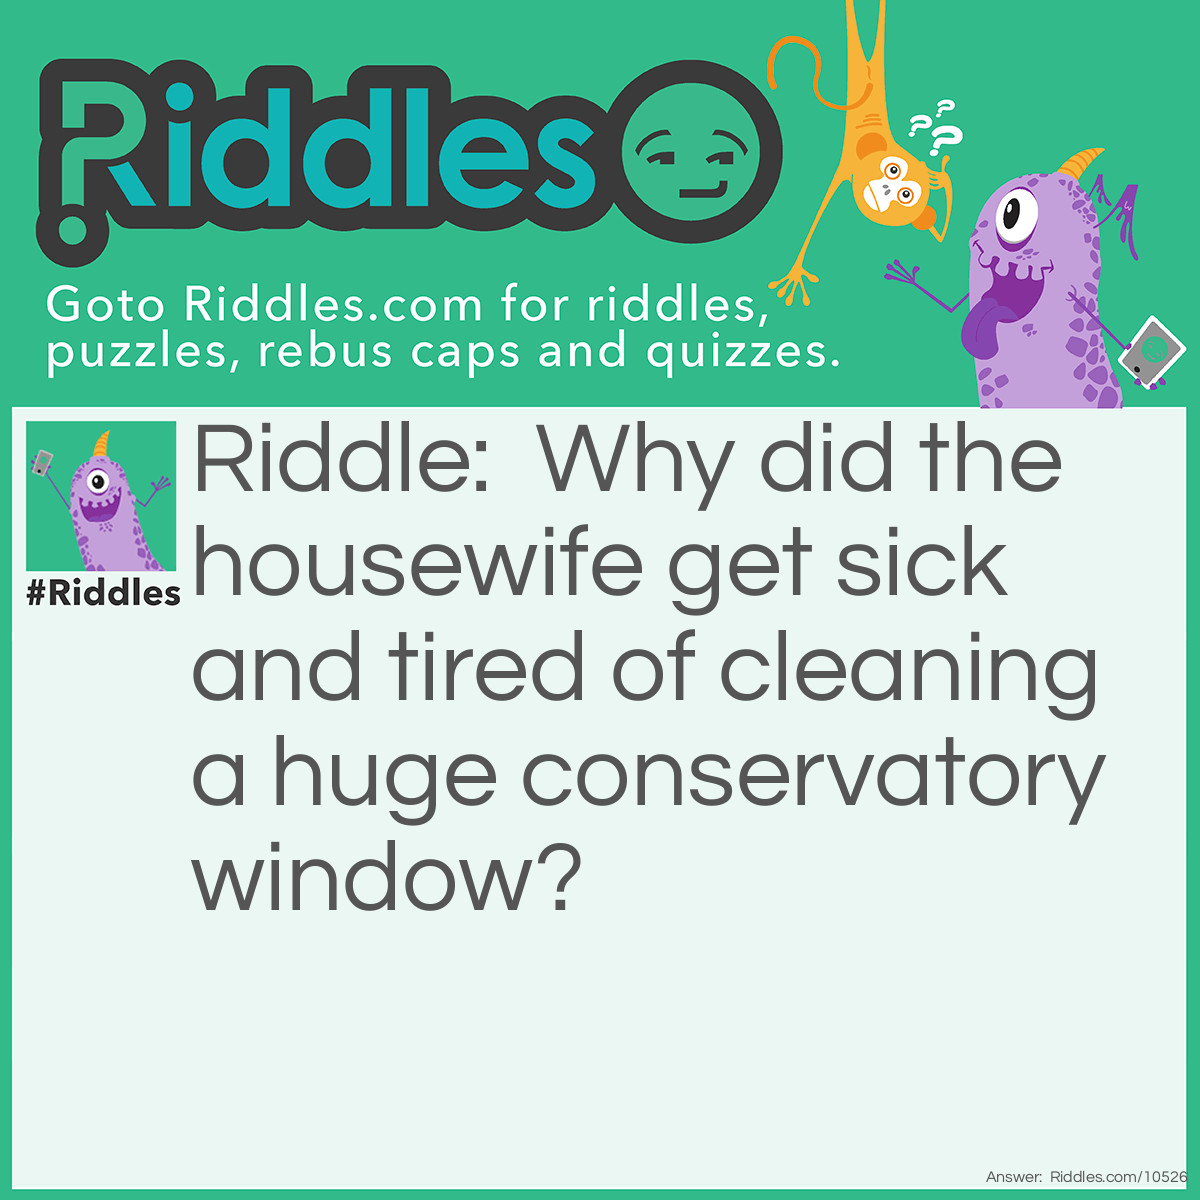 Riddle: Why did the housewife get sick and tired of cleaning a huge conservatory window? Answer: Because it was such a pane (pain).